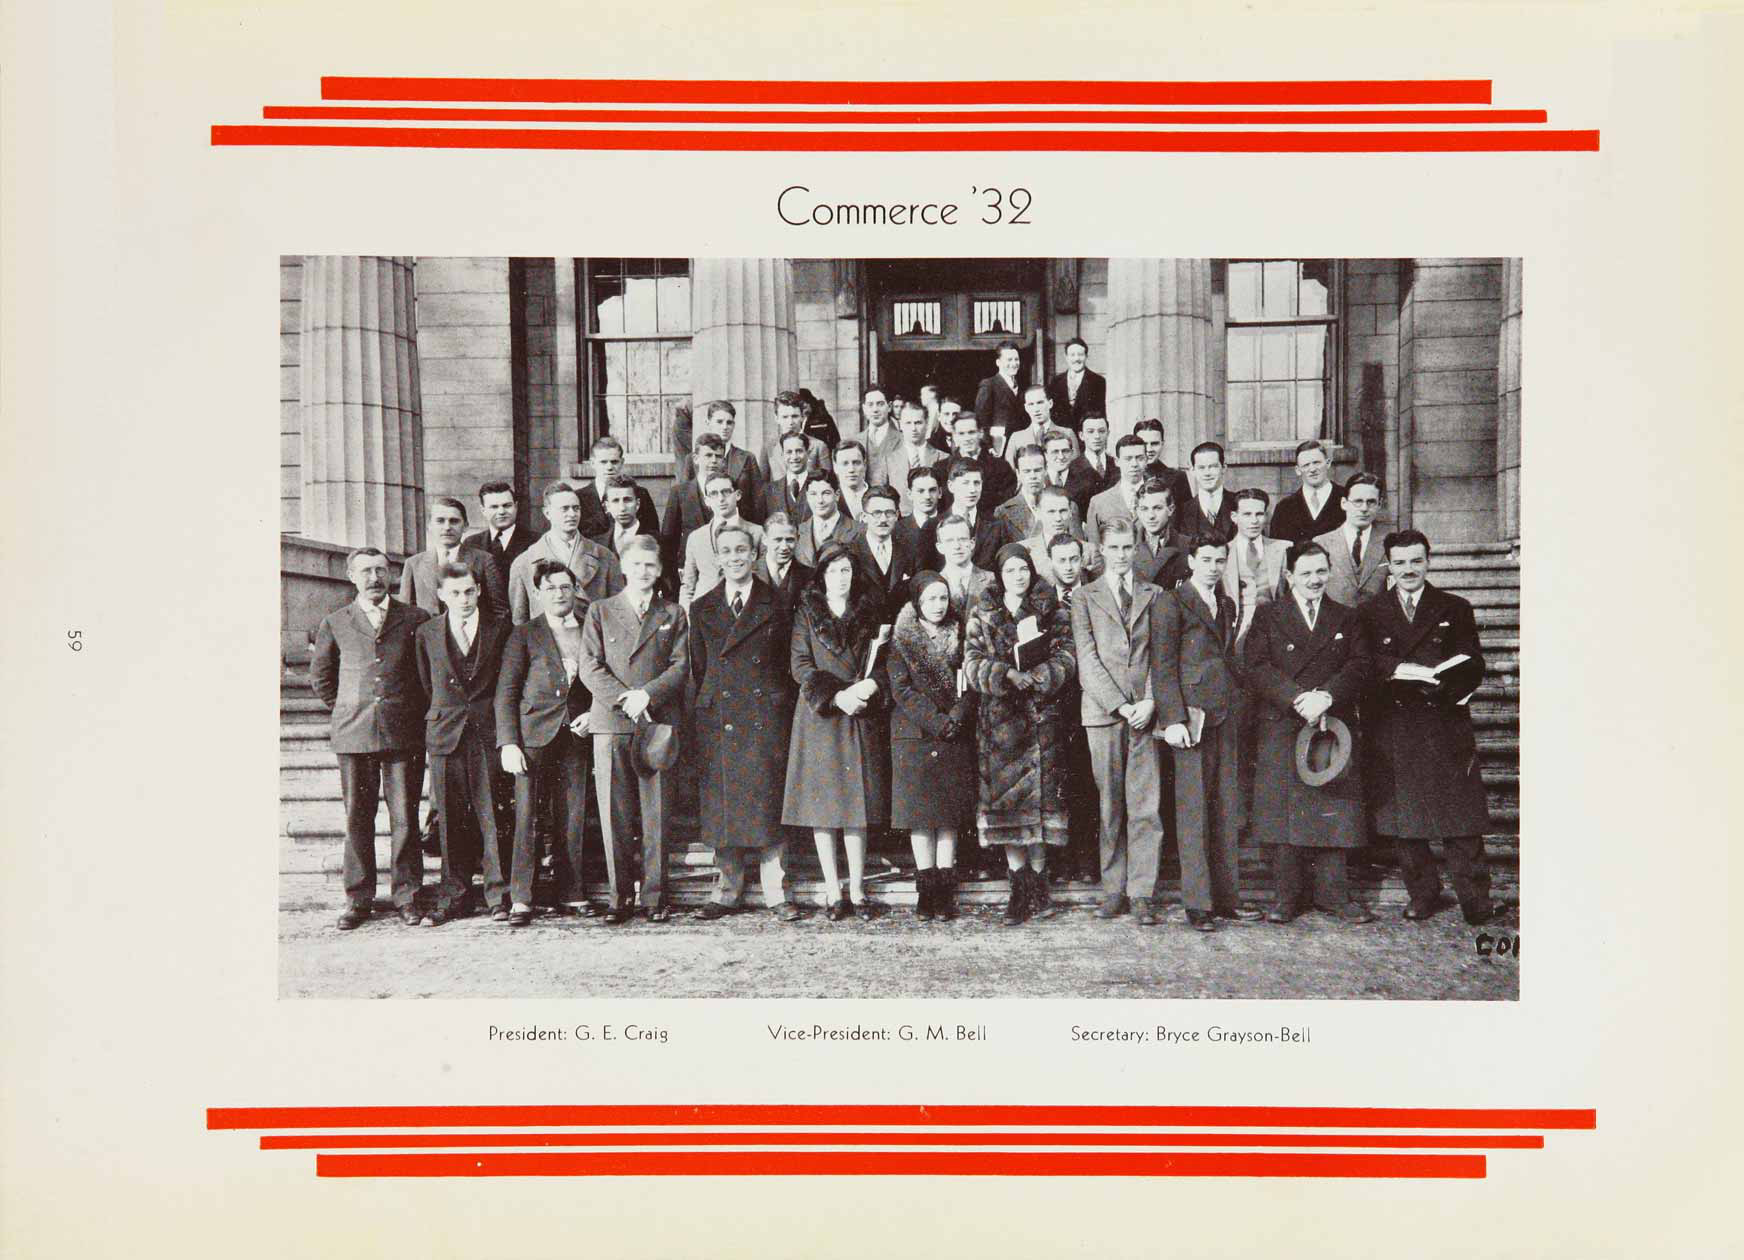 McGill Yearbook: 1931